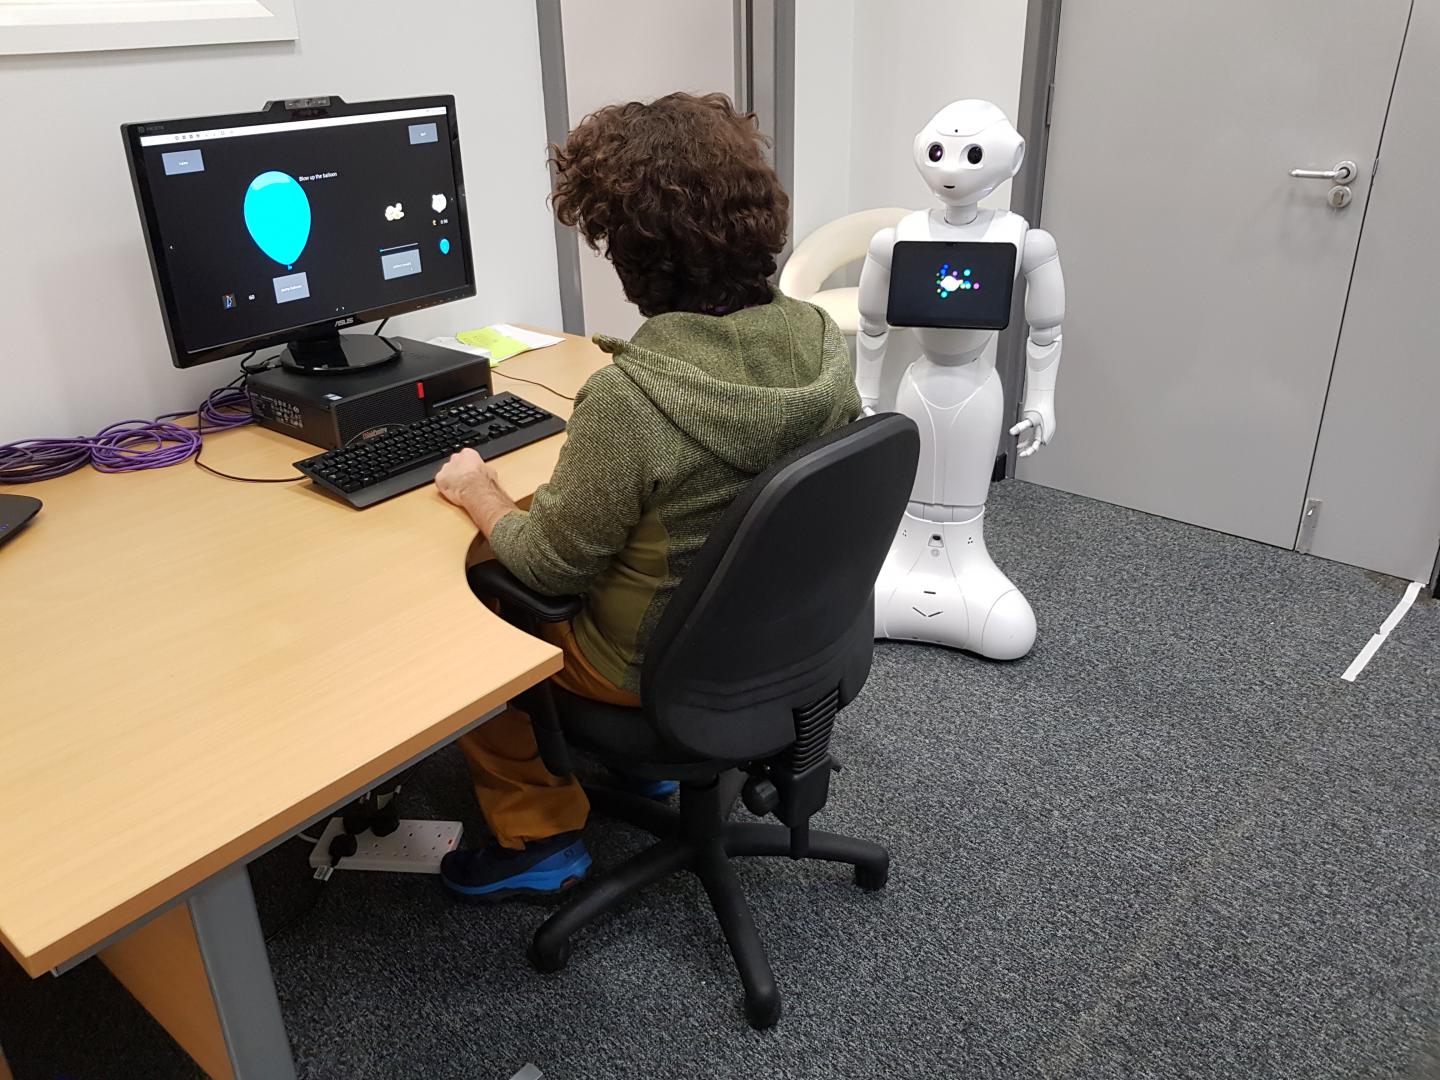 A SoftBank Robotics Pepper robot was used in the two robot conditions. Source: University of Southampton